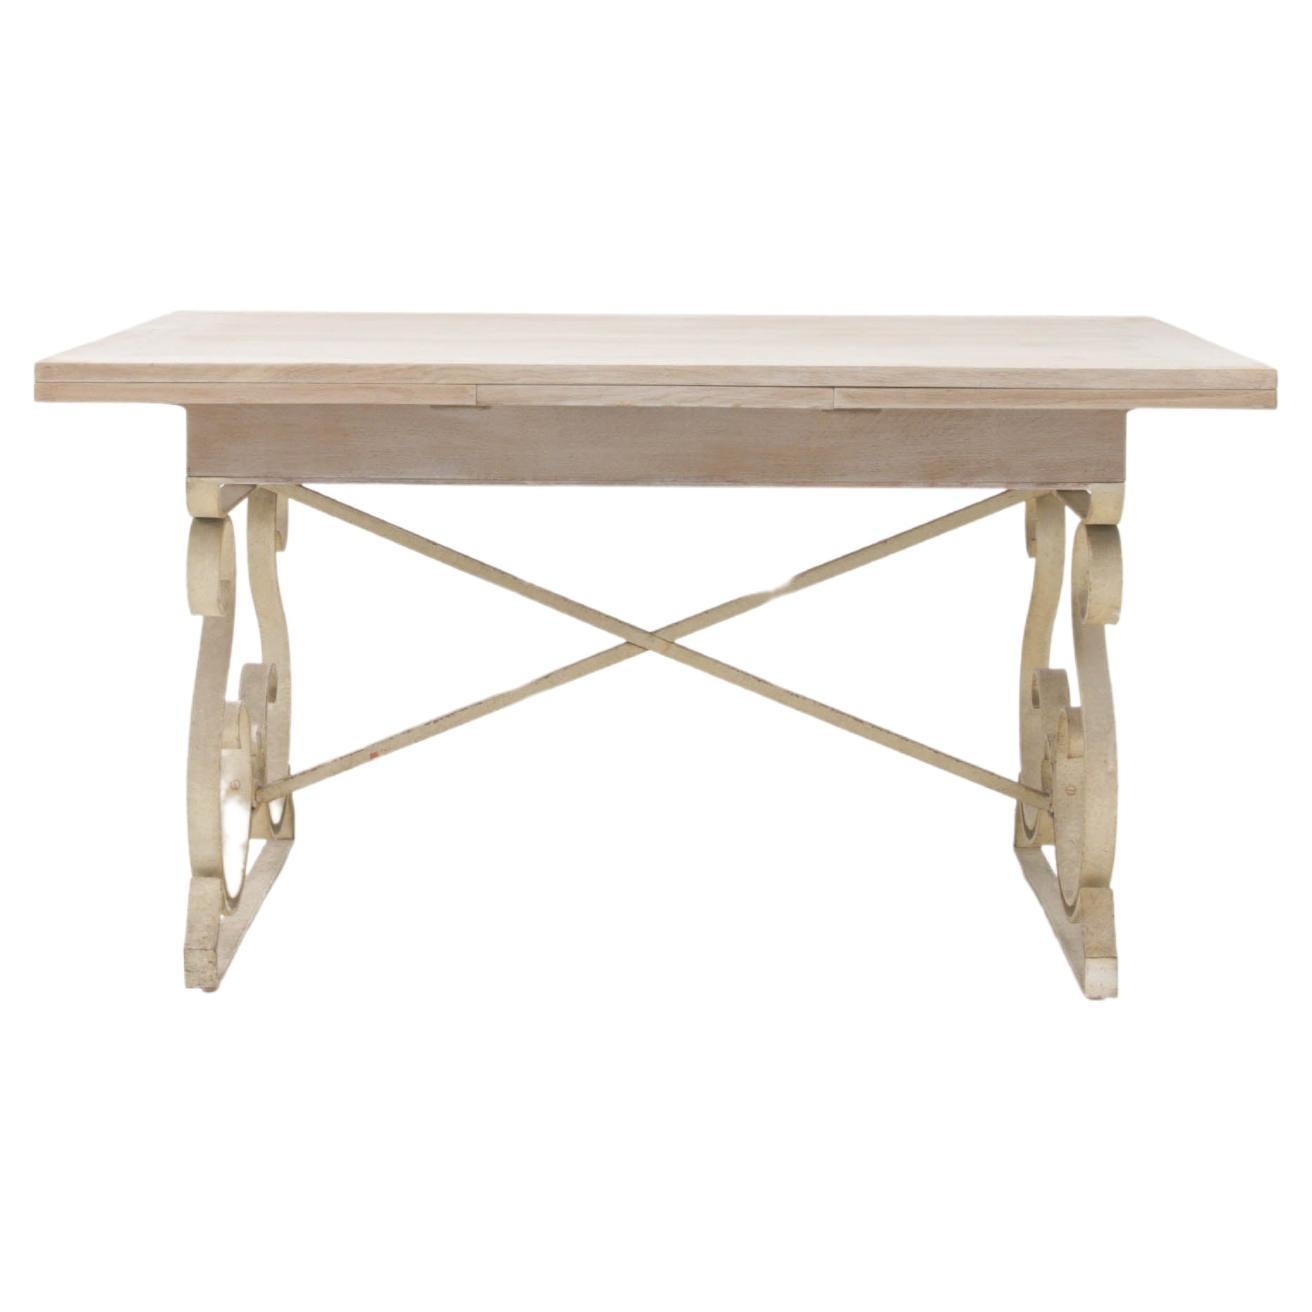 20th Century French Metal Folding Table with Wooden Top For Sale